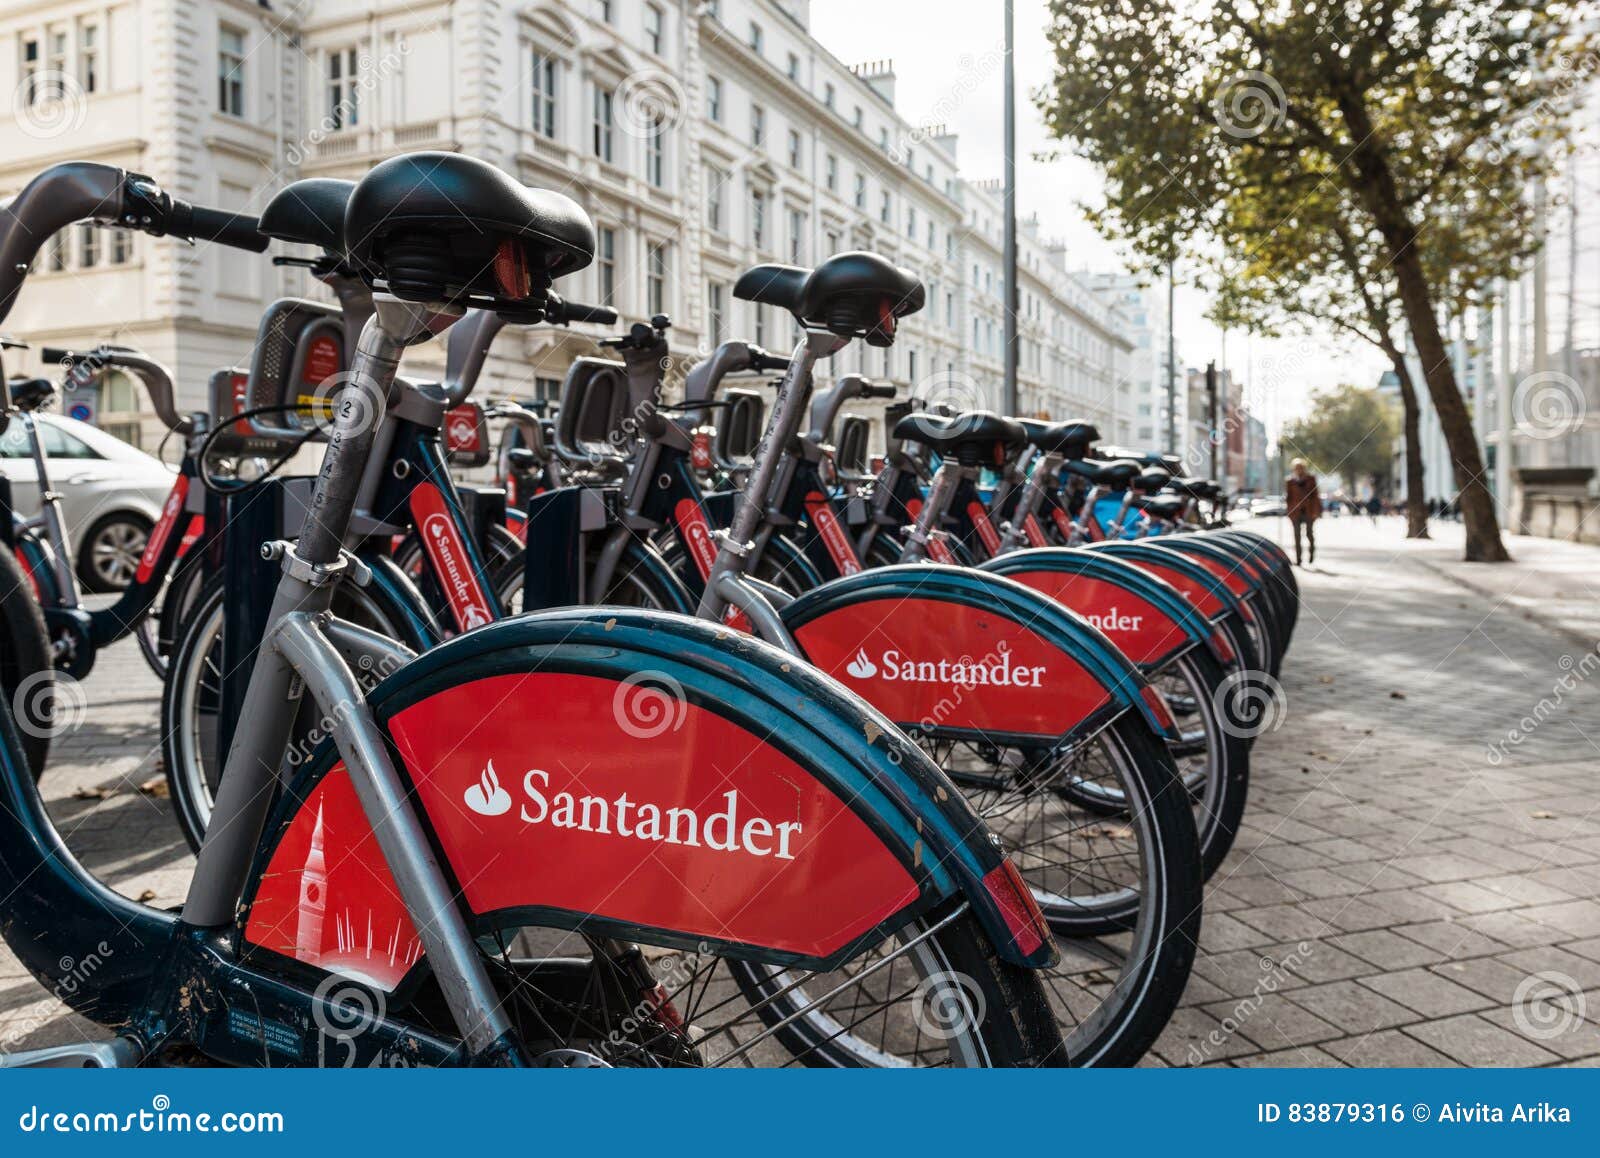 Santander Bikes In London Uk Editorial Photo Image Of Cycle Tourism